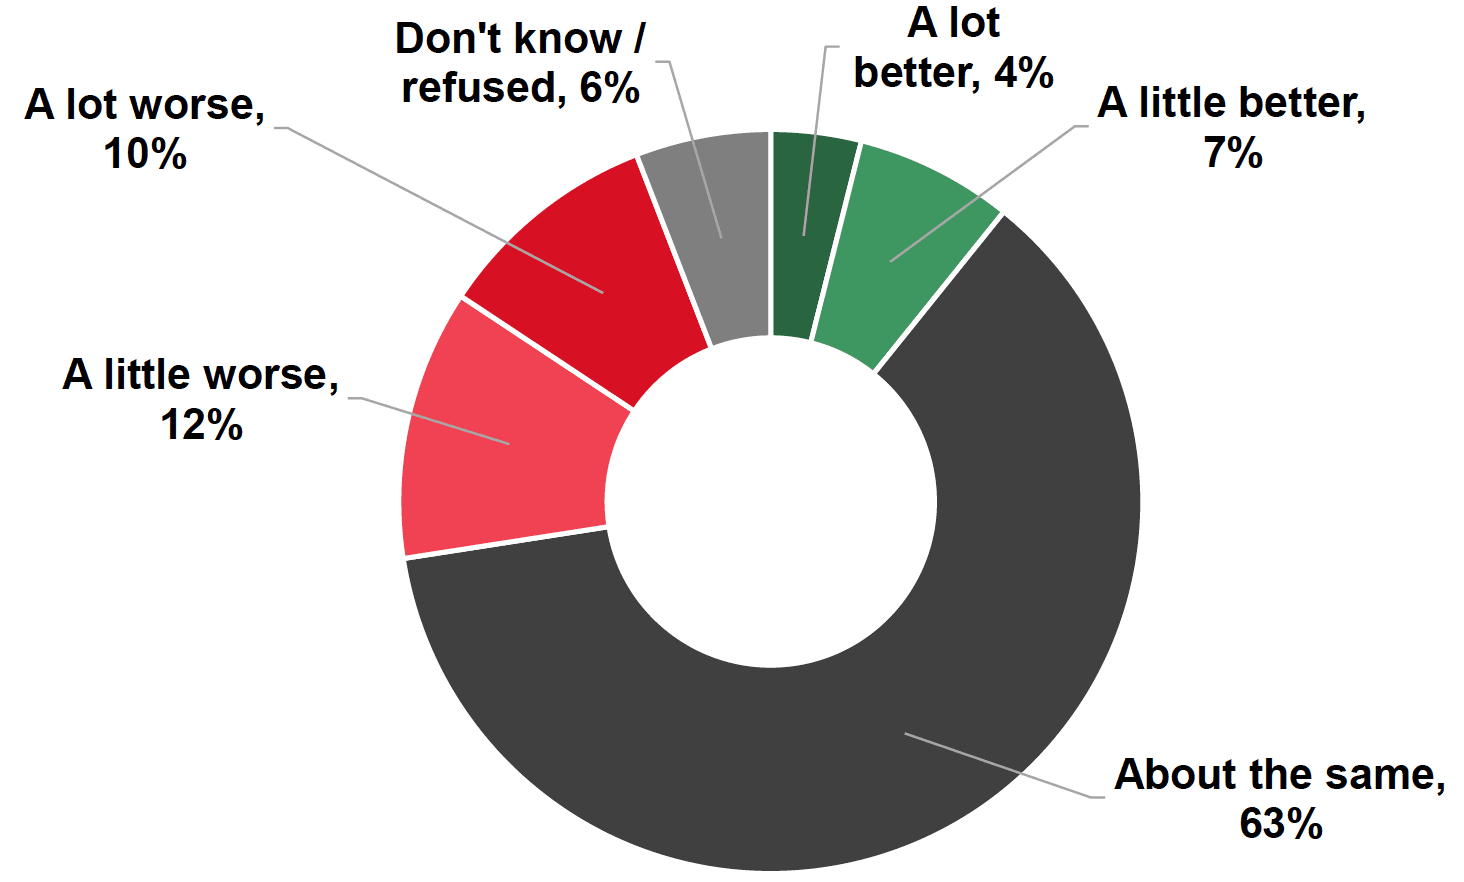 Pie chart showing 22% think their neighbourhood has got worse, 63% think it has stayed the same, and 11% think it has got better